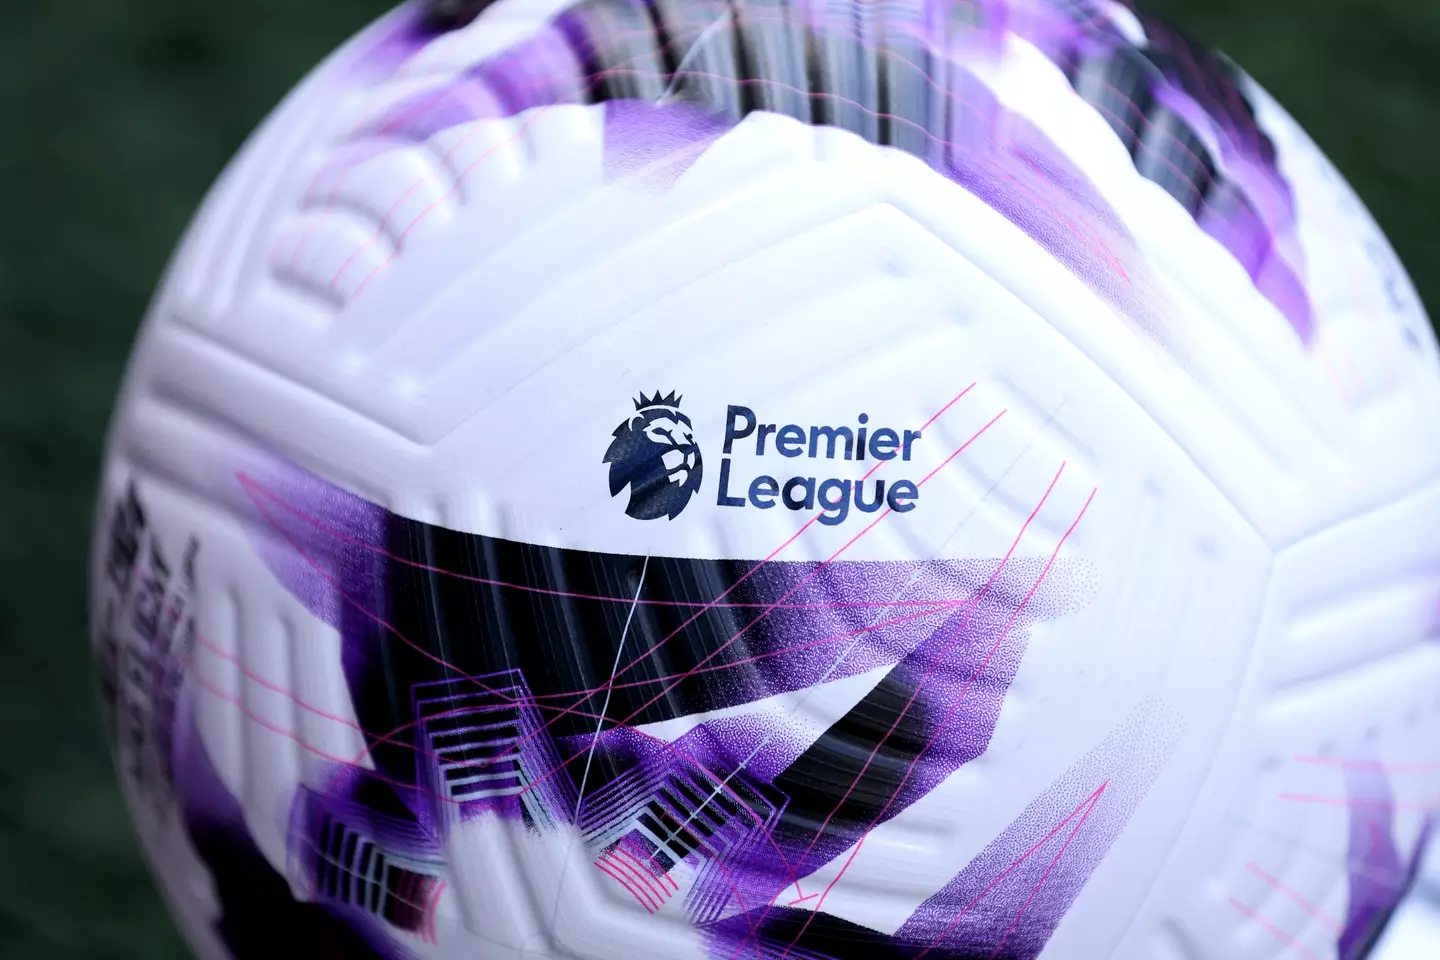 The Premier League shuts down streams during live games.